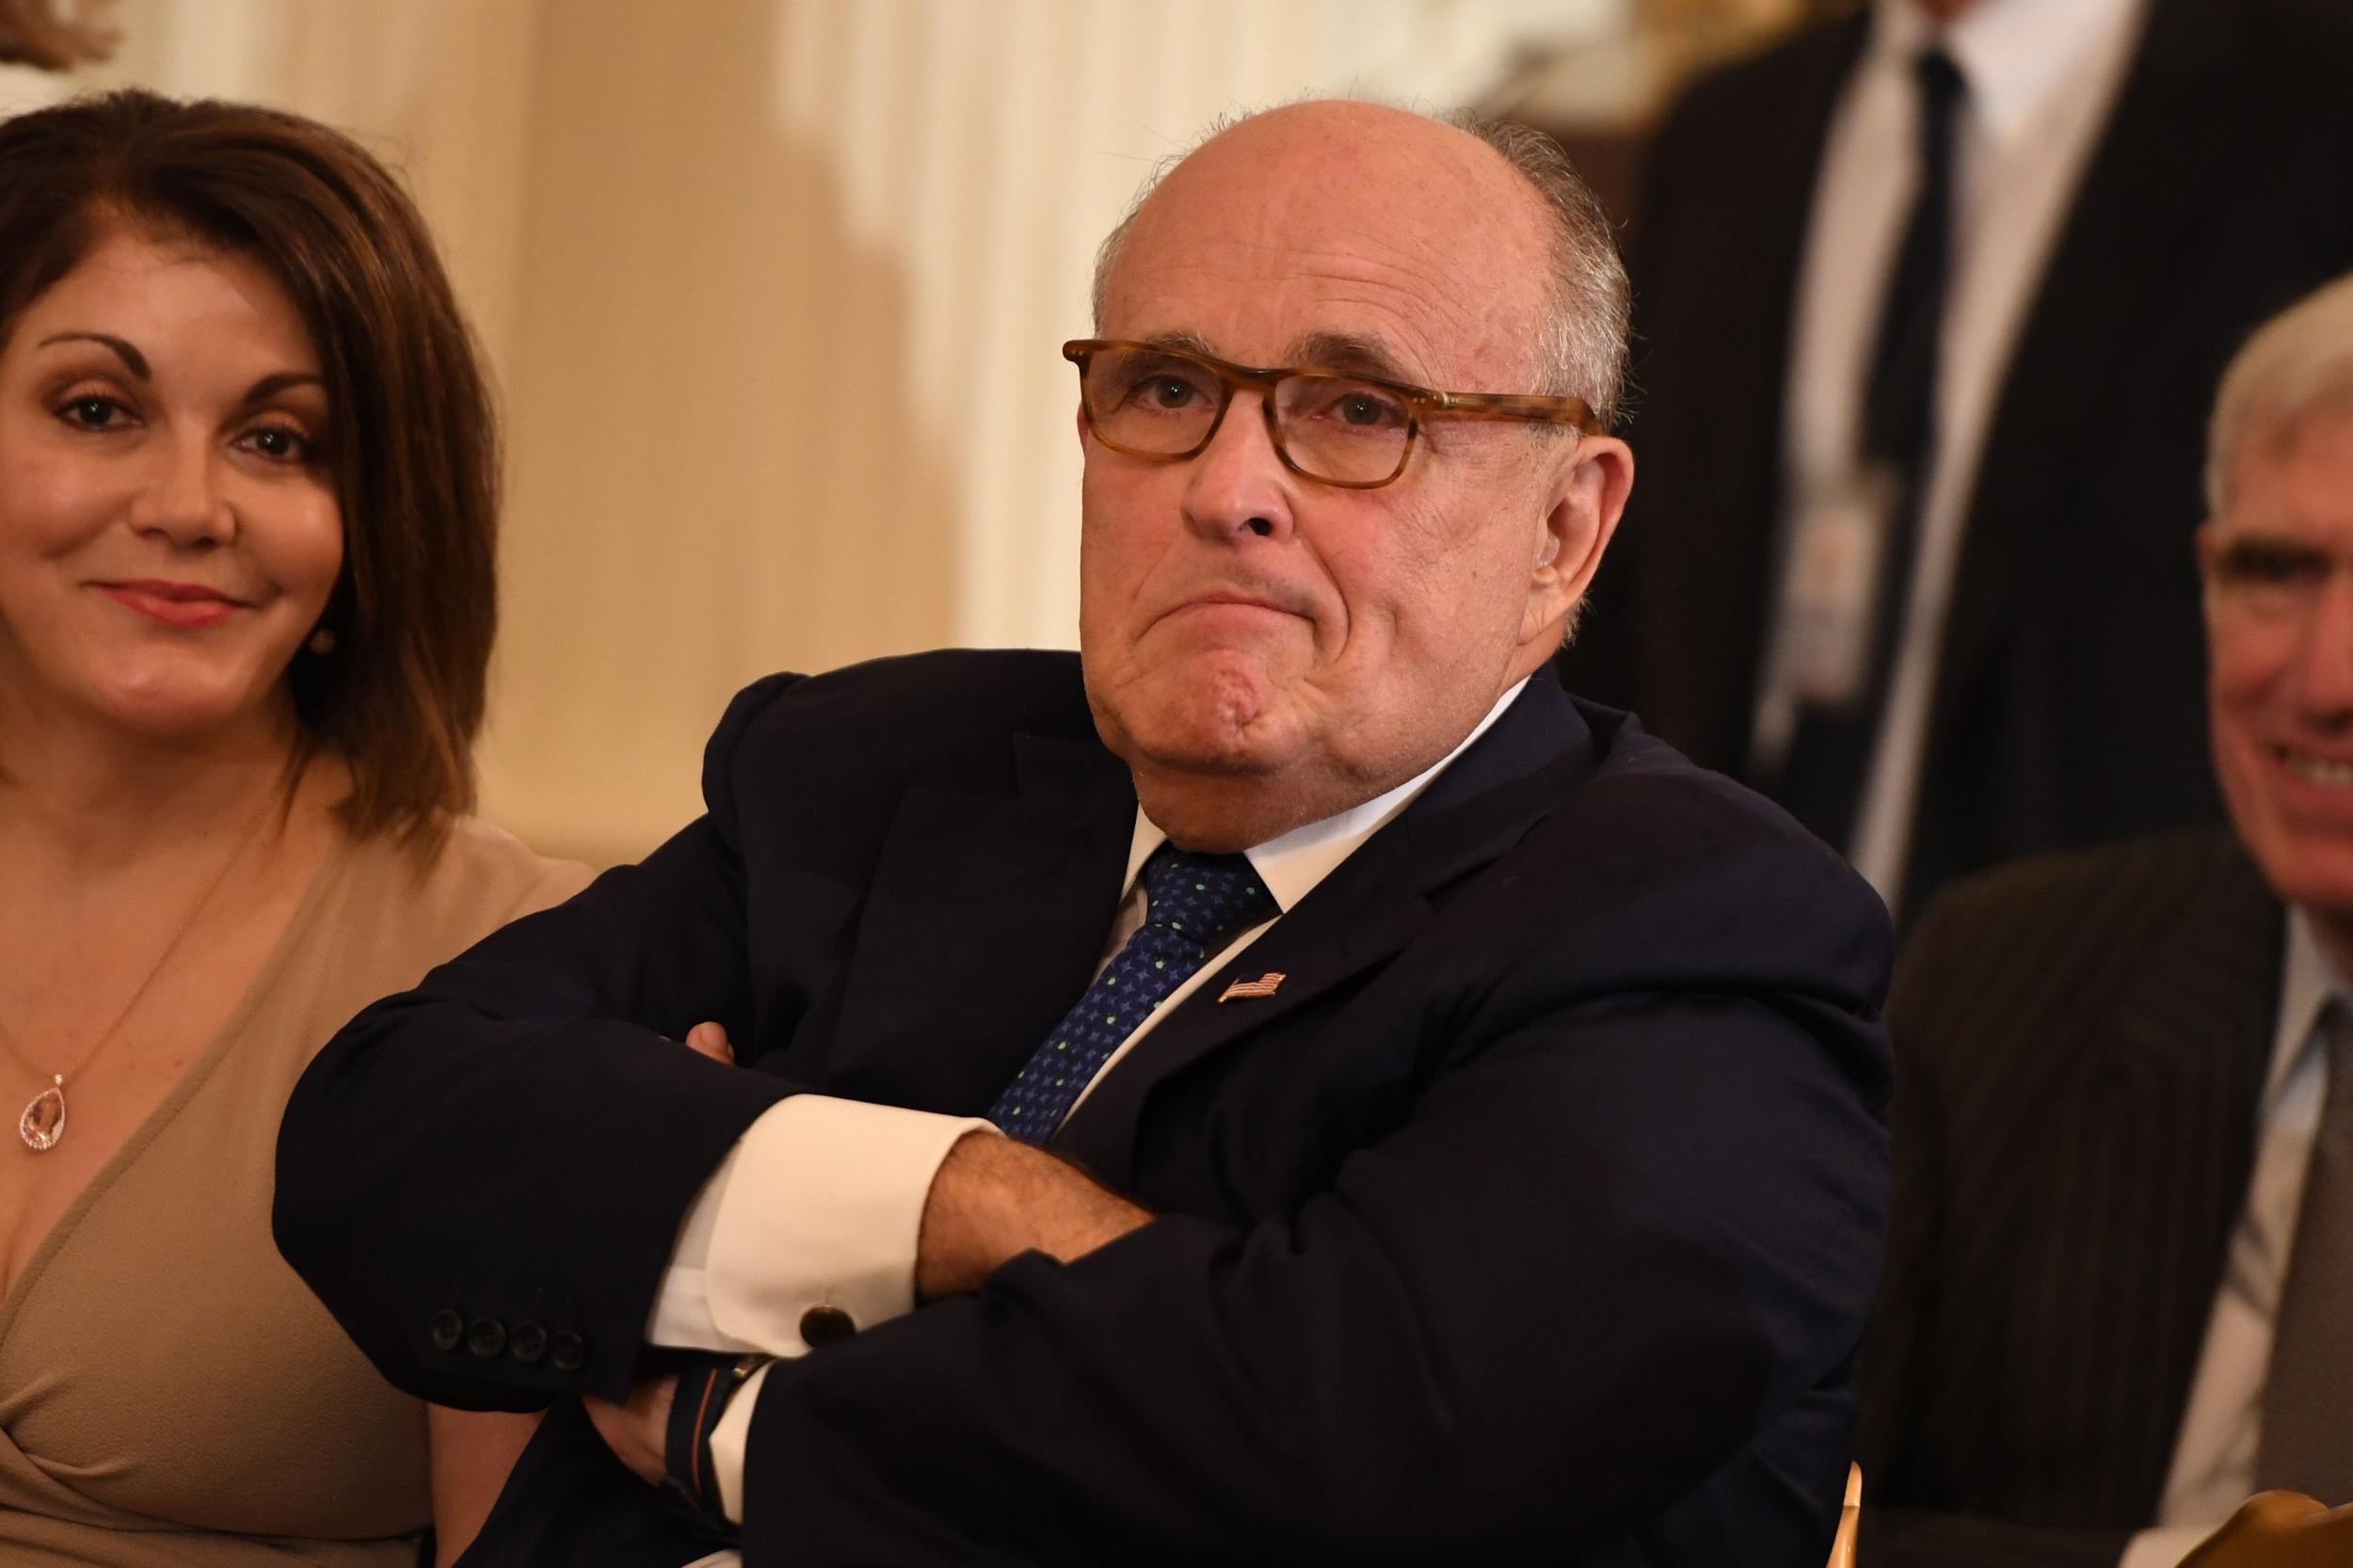 Rudy Giuliani, former New York City Mayor and Donald Trump's personal lawyer, backtracks his statement on whether the president will answer questions in the FBI's Russia probe